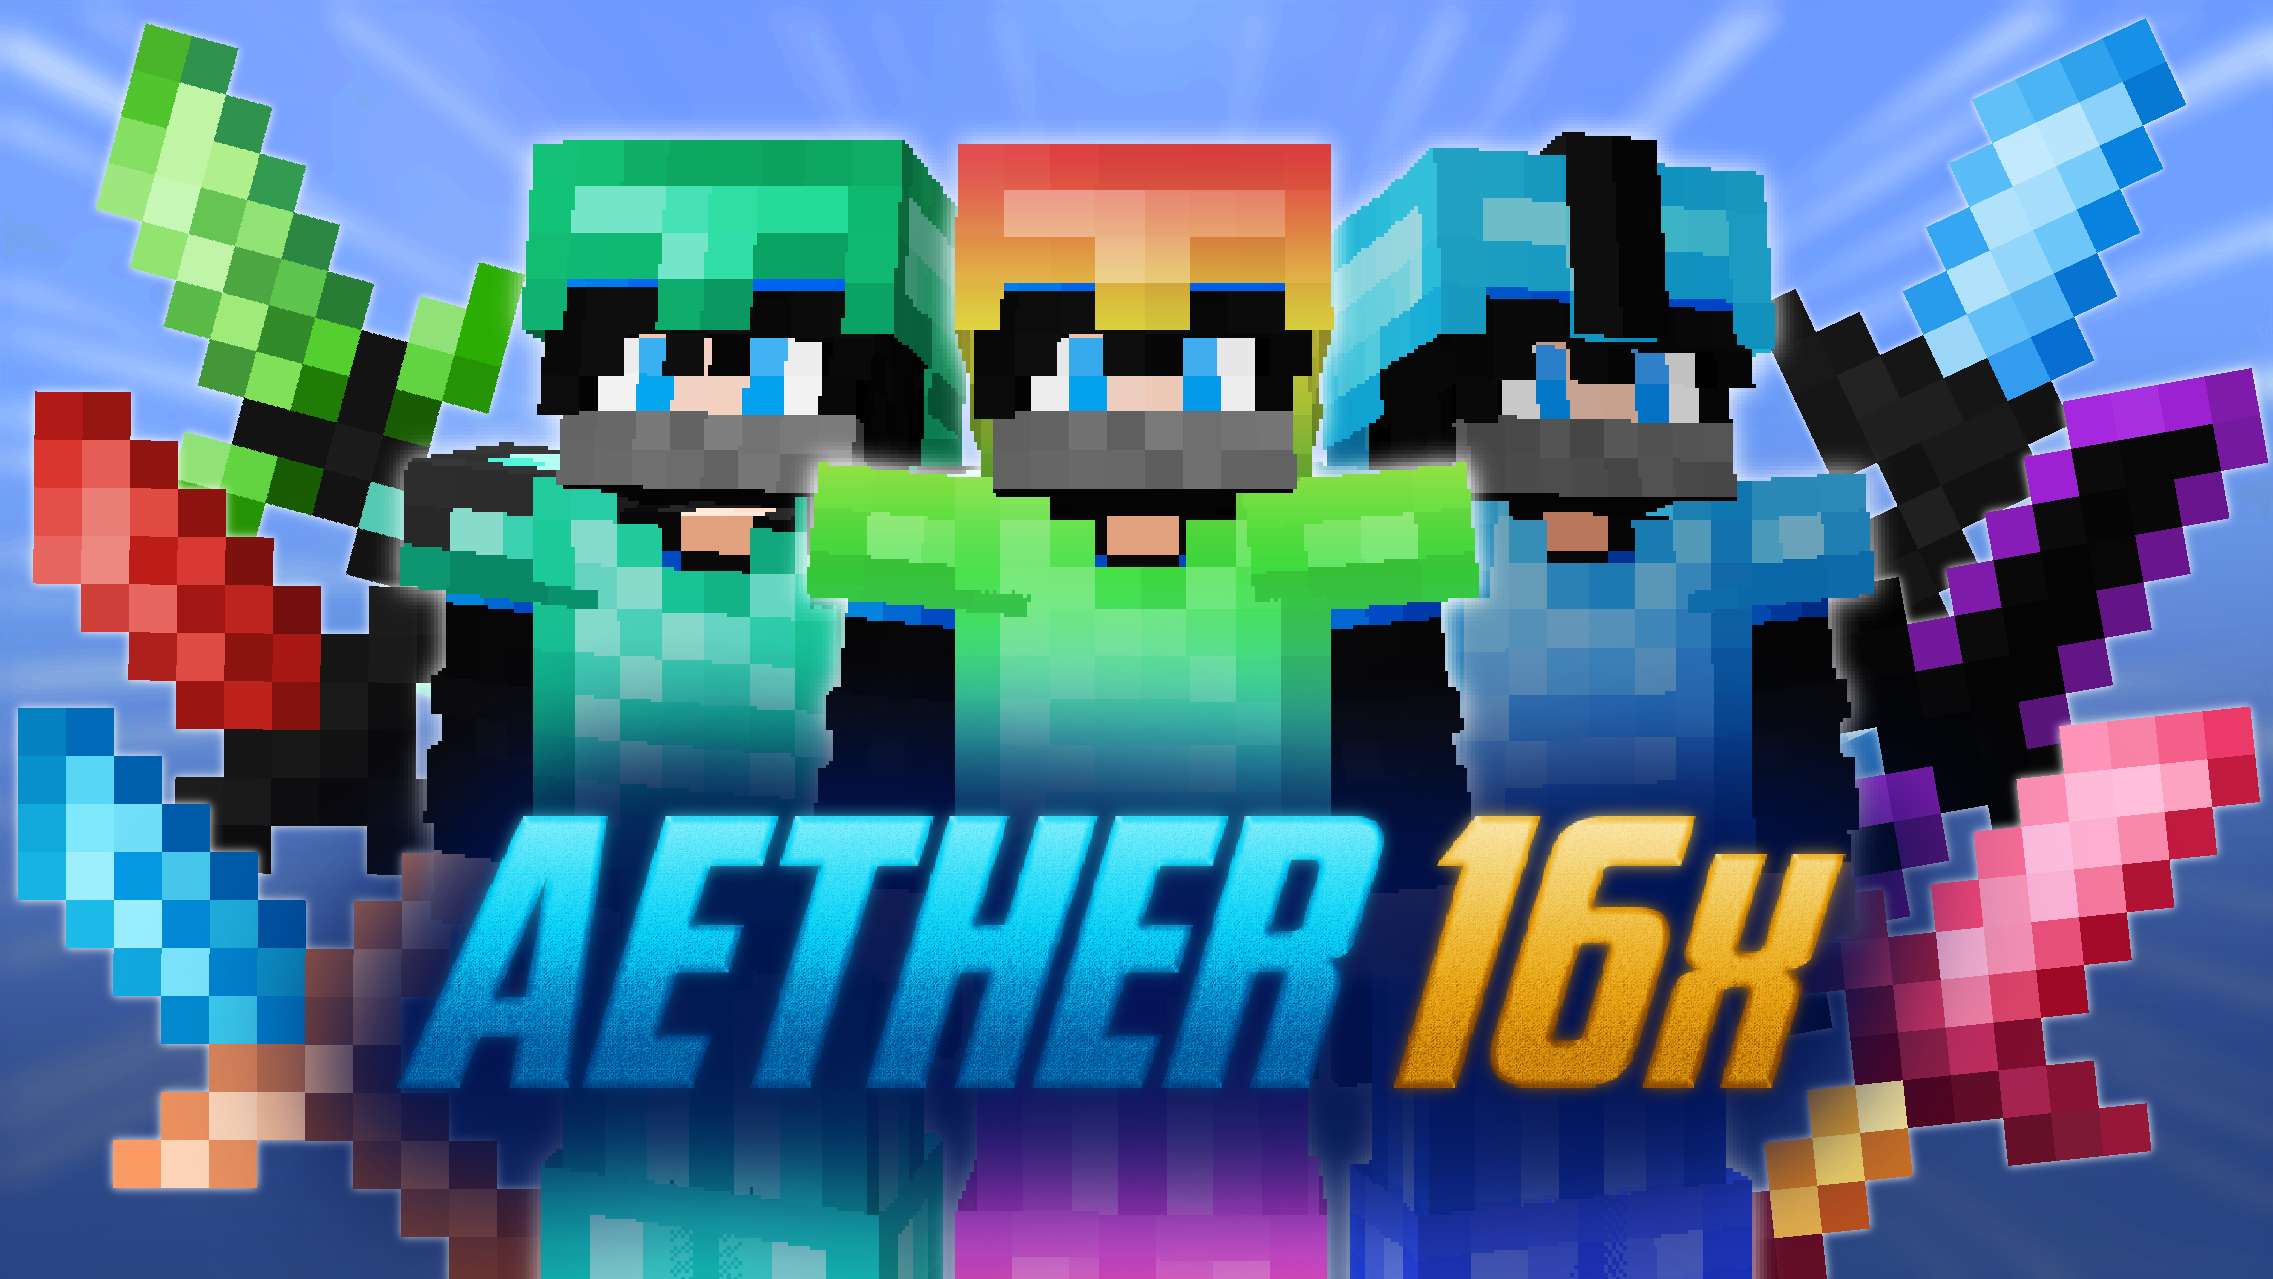 Aether  [Zoyr] 16x by Mqryo on PvPRP